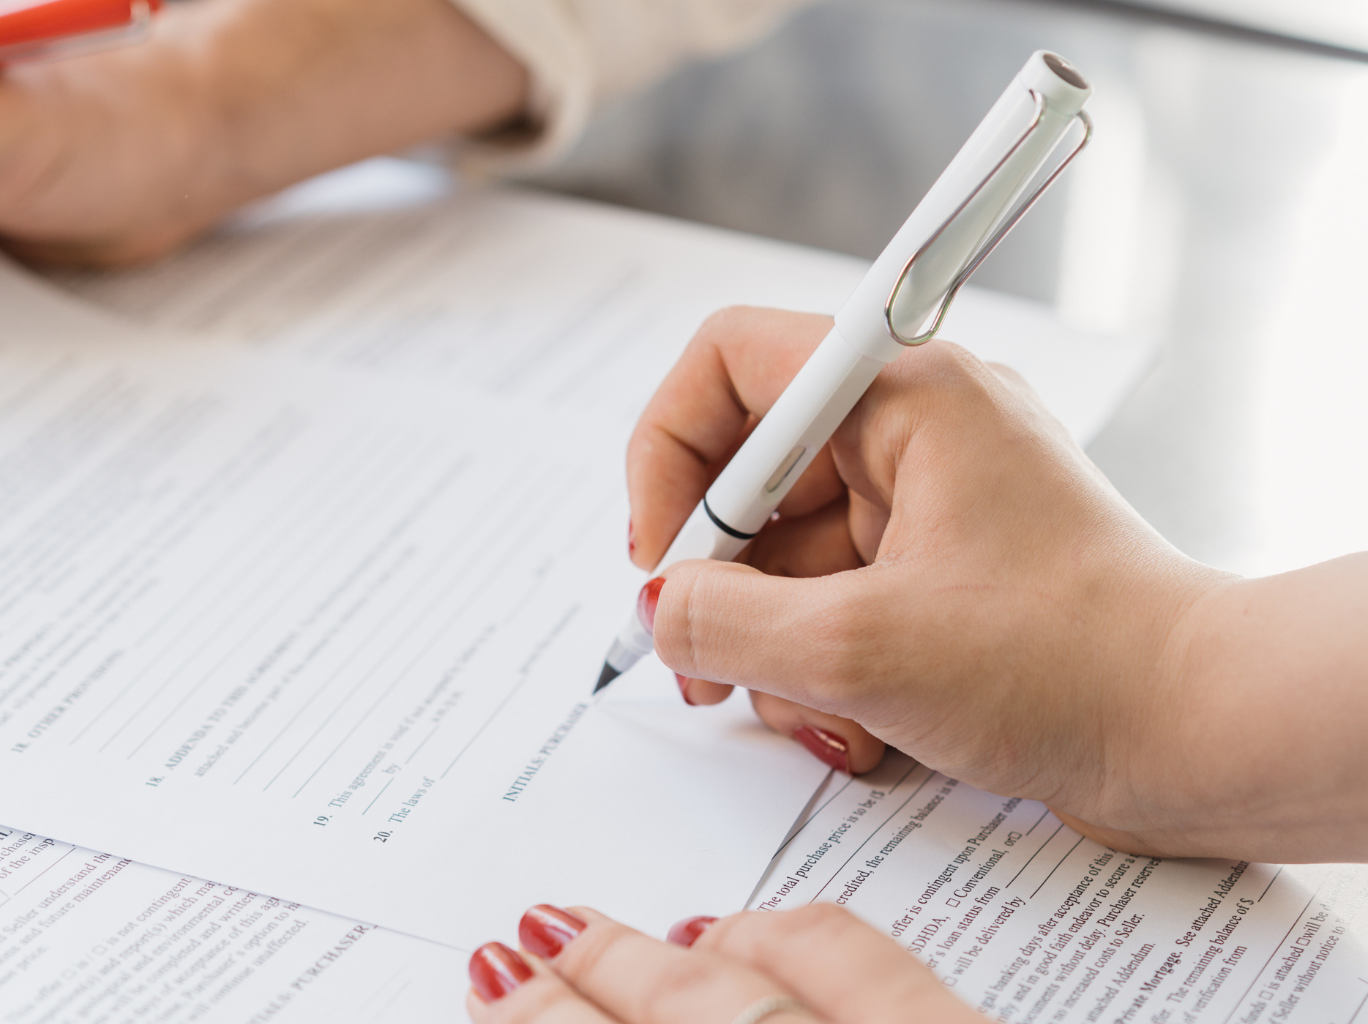 A female entrepreneur holding a pen and adding her signature to the end of a small business legal contract given by her business lawyer.